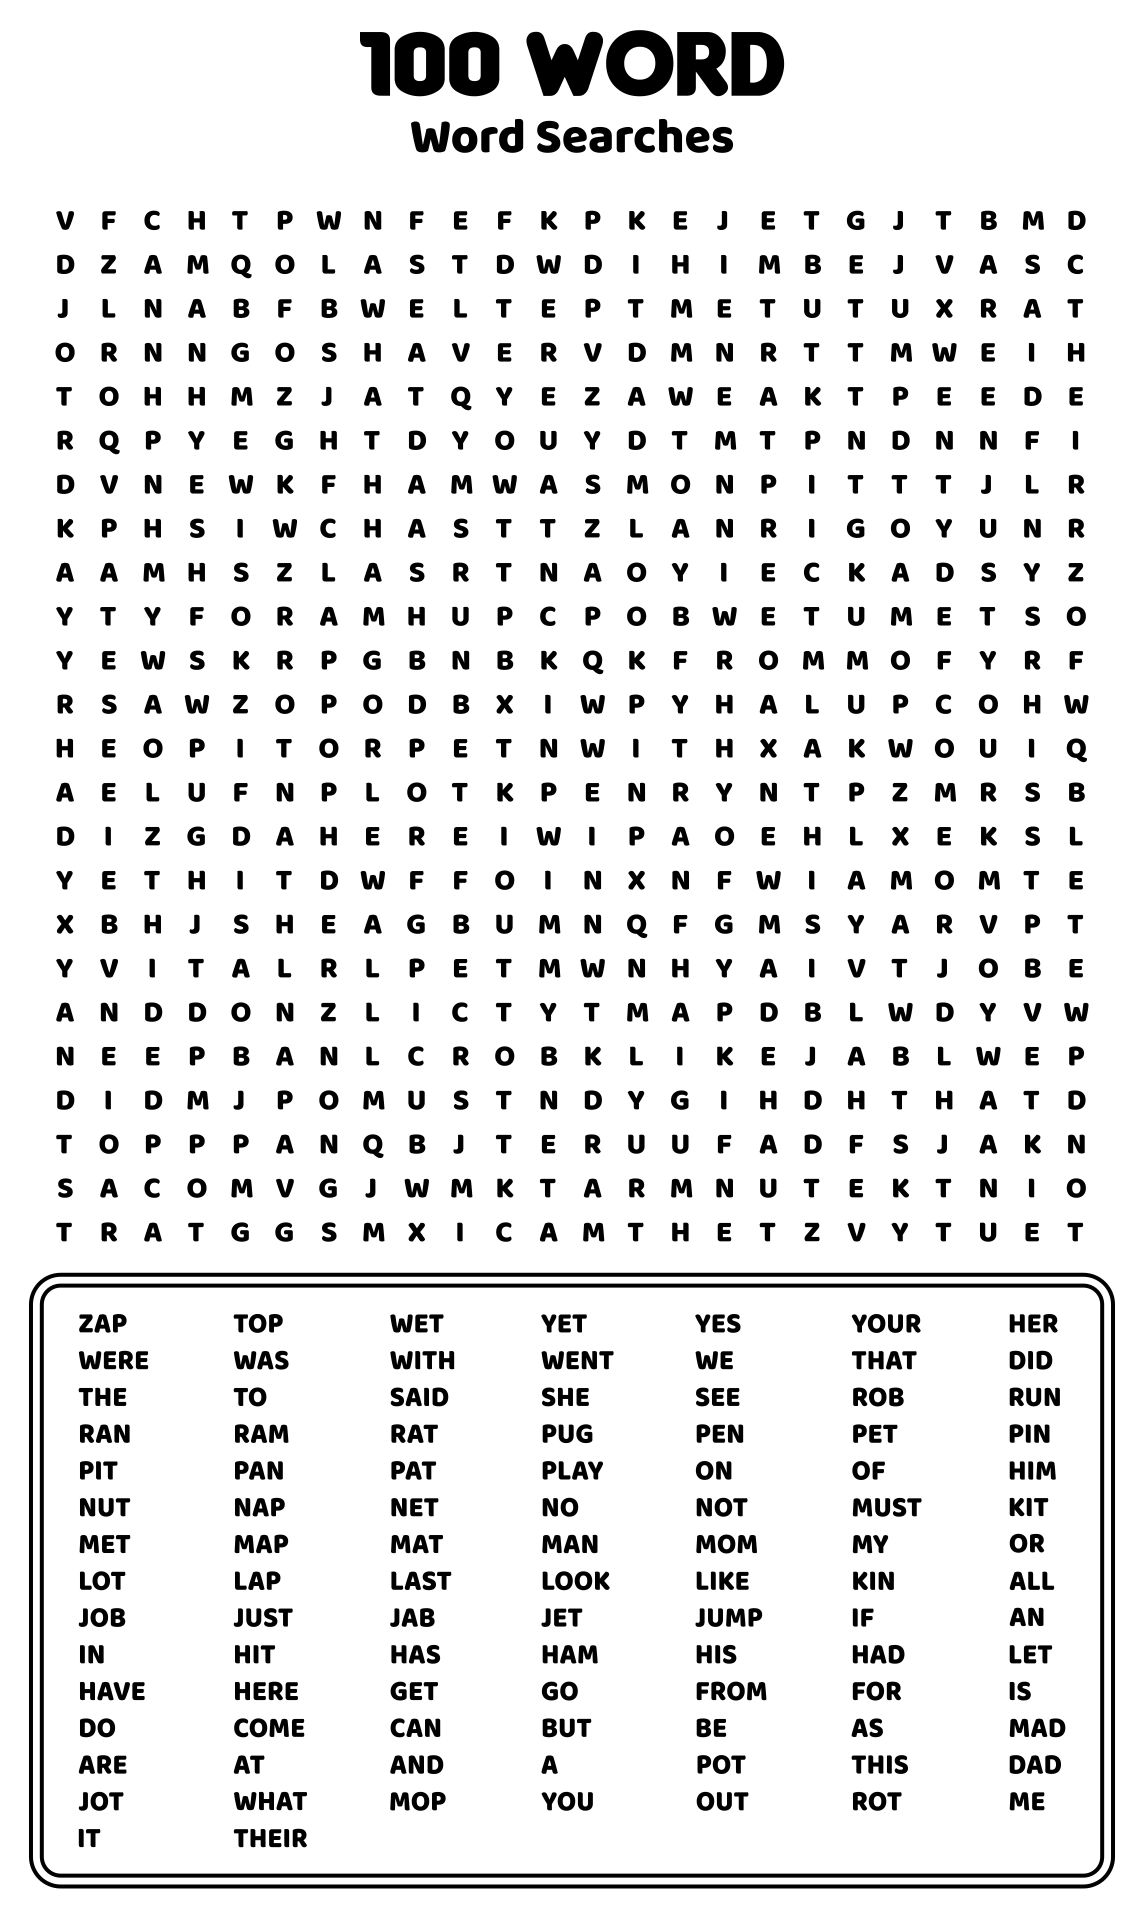 100-word-word-search-printable-get-your-hands-on-amazing-free-printables